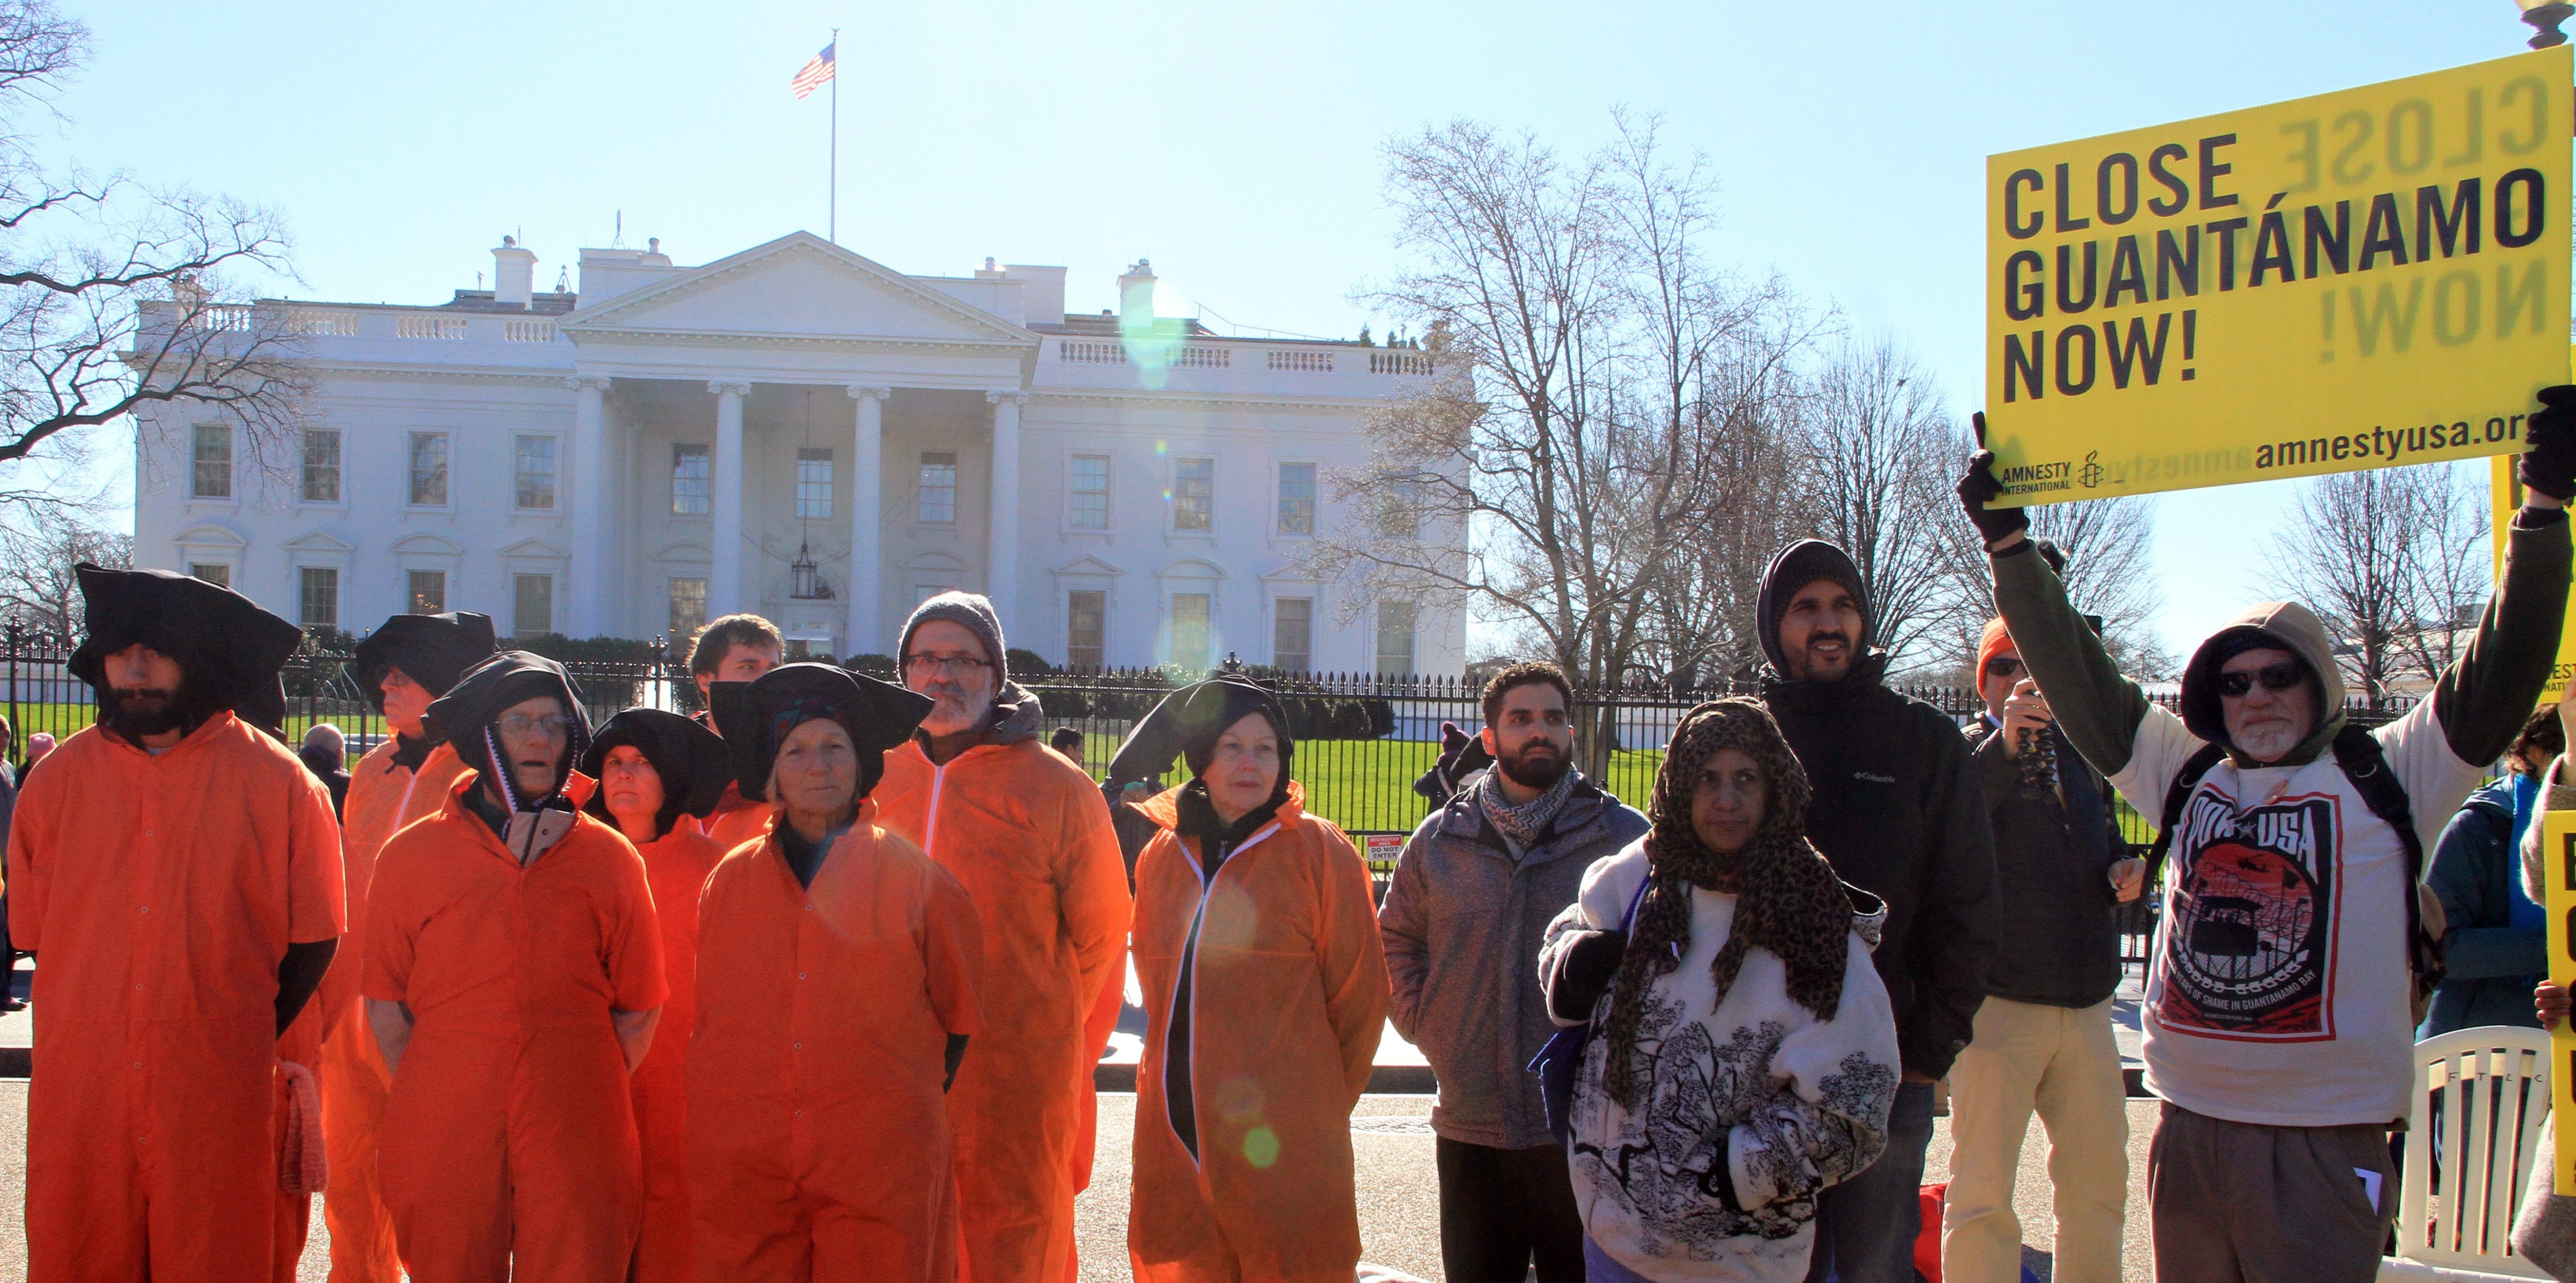 Protest in front of the White House against Guantanamo detention center